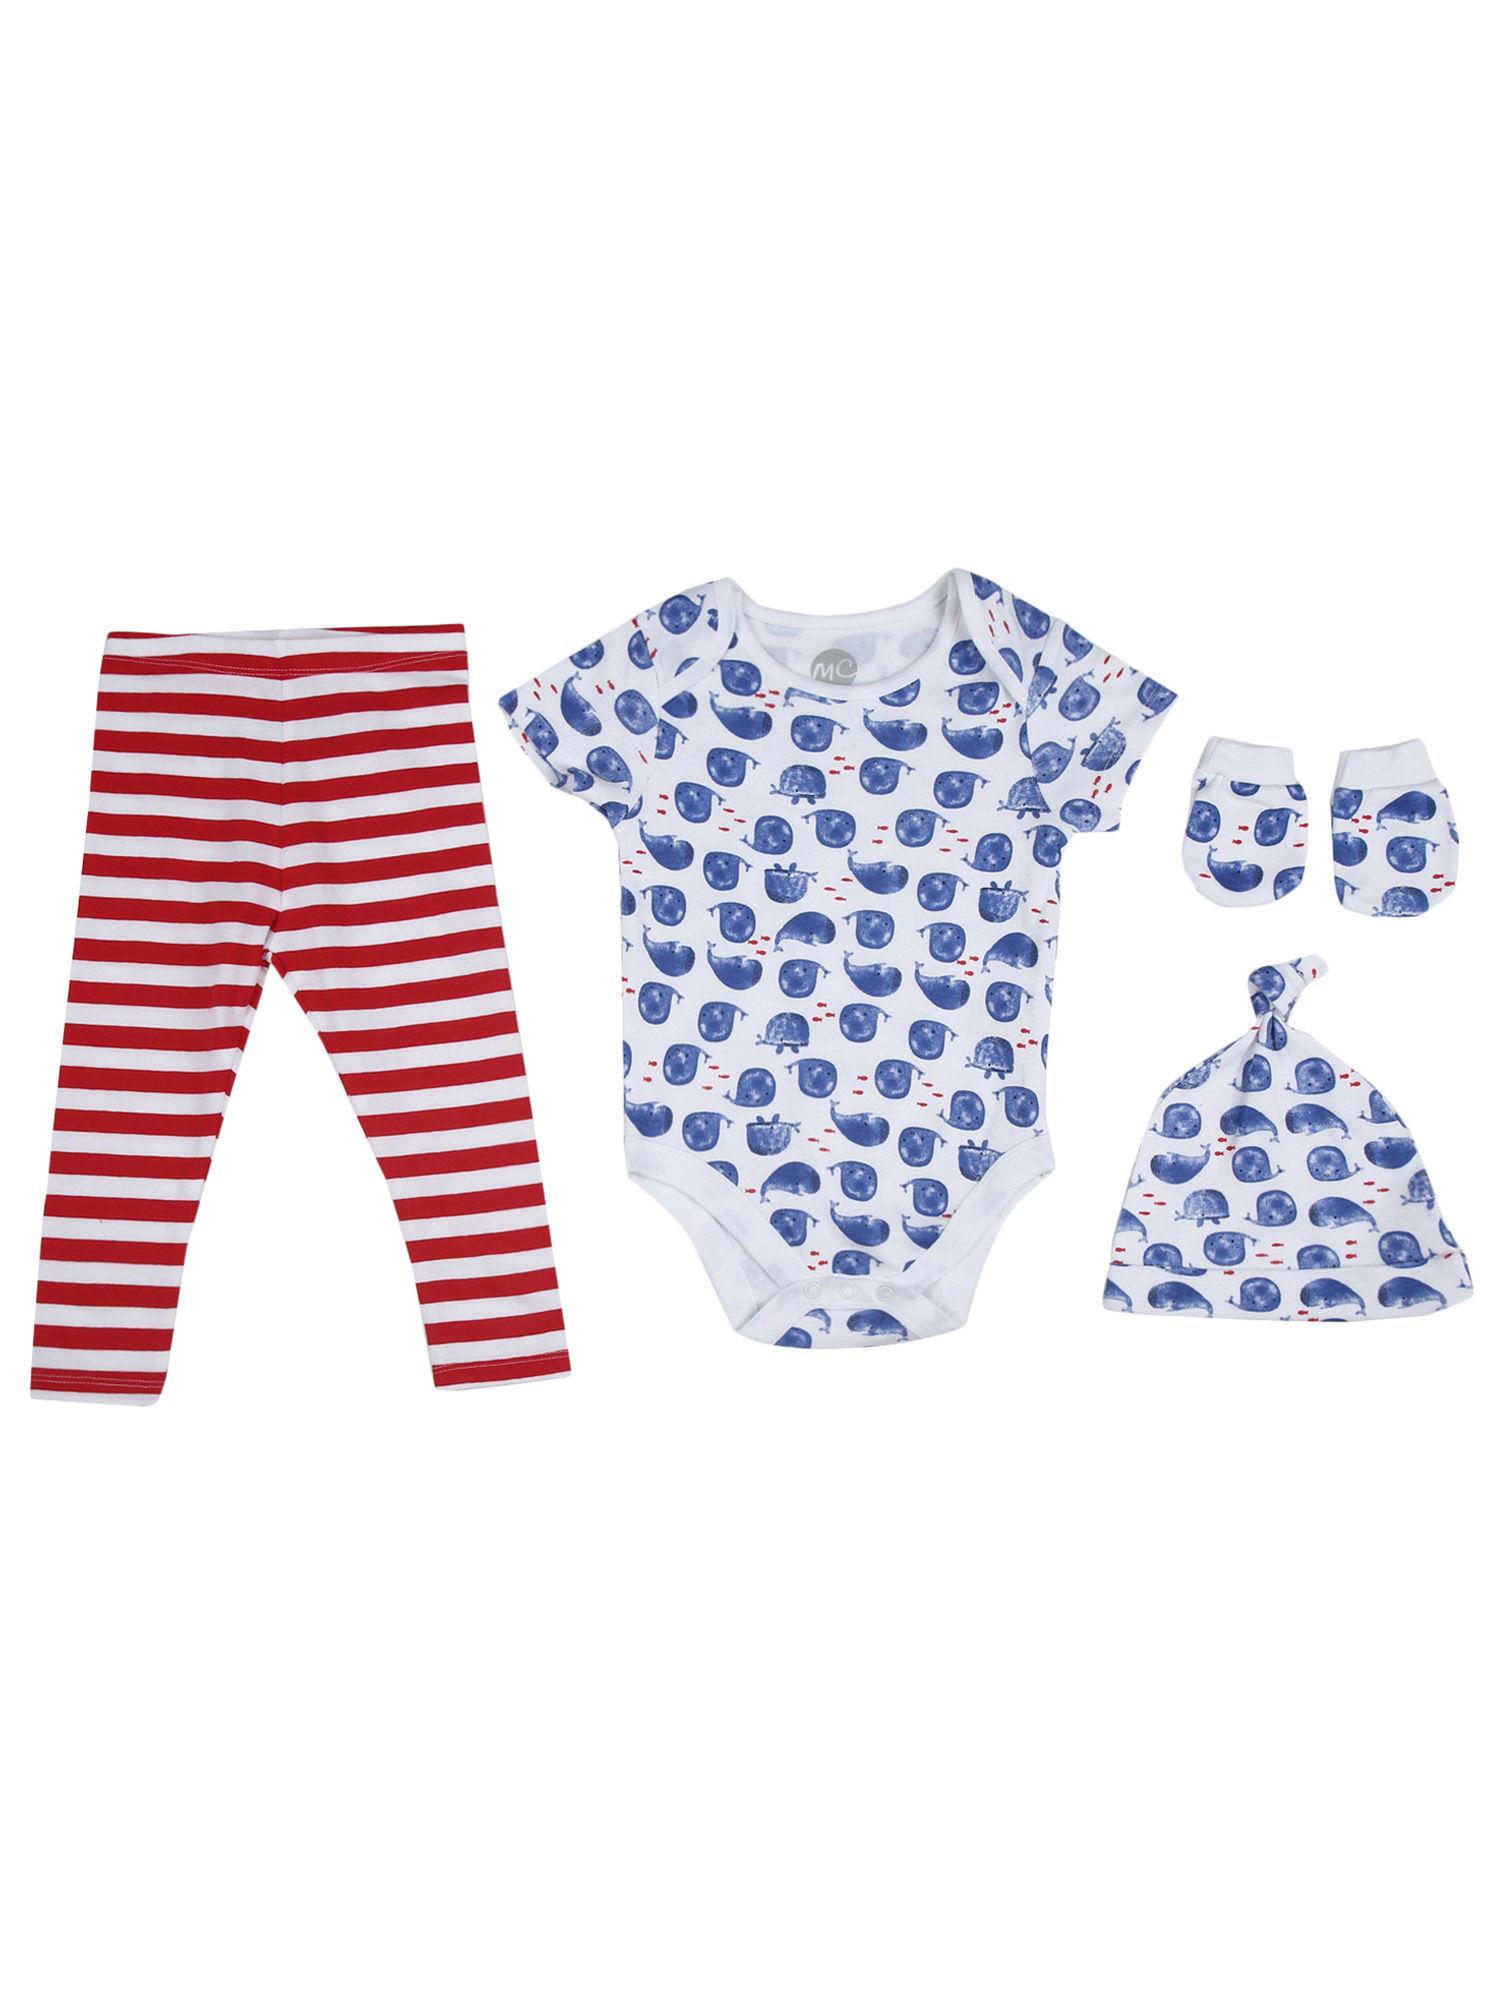 mother-care-whale-print-set-for-bodysuit-and-pyjama-with-socks-&-cap-(set-of-4)